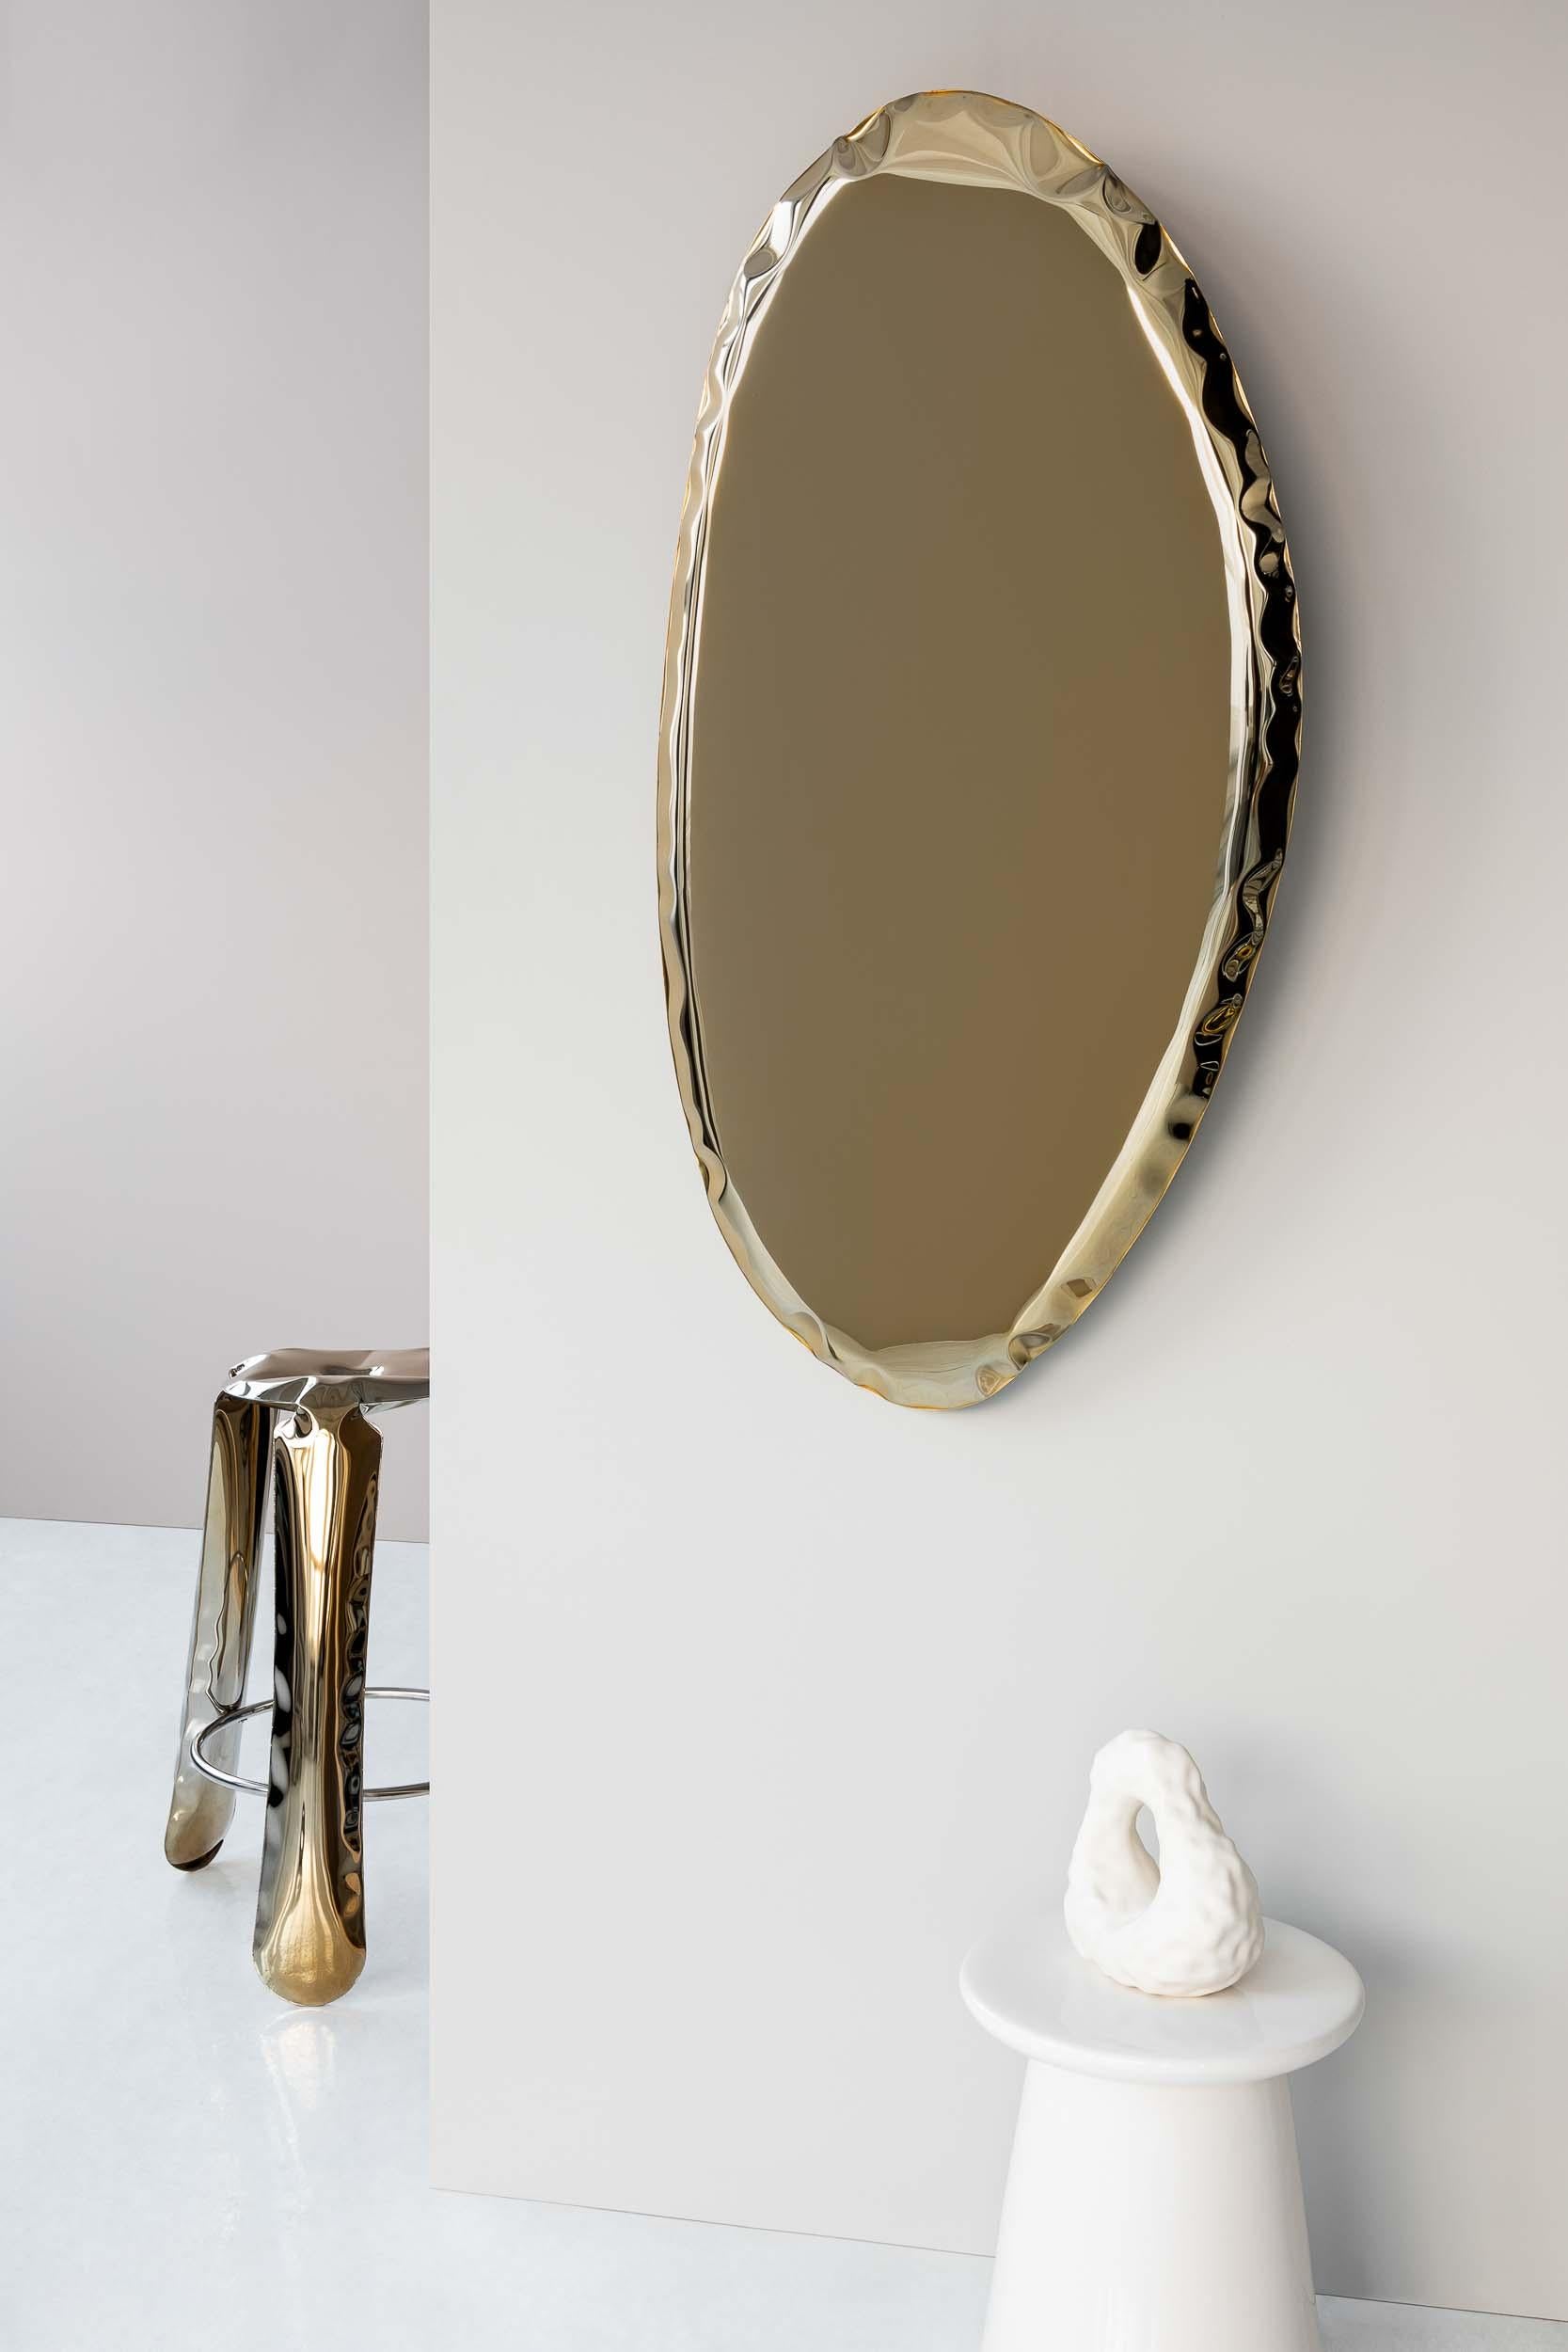 Contemporary Mirror 'Tafla O4', AURUM Collection, Light Gold, by Zieta In New Condition For Sale In Paris, FR